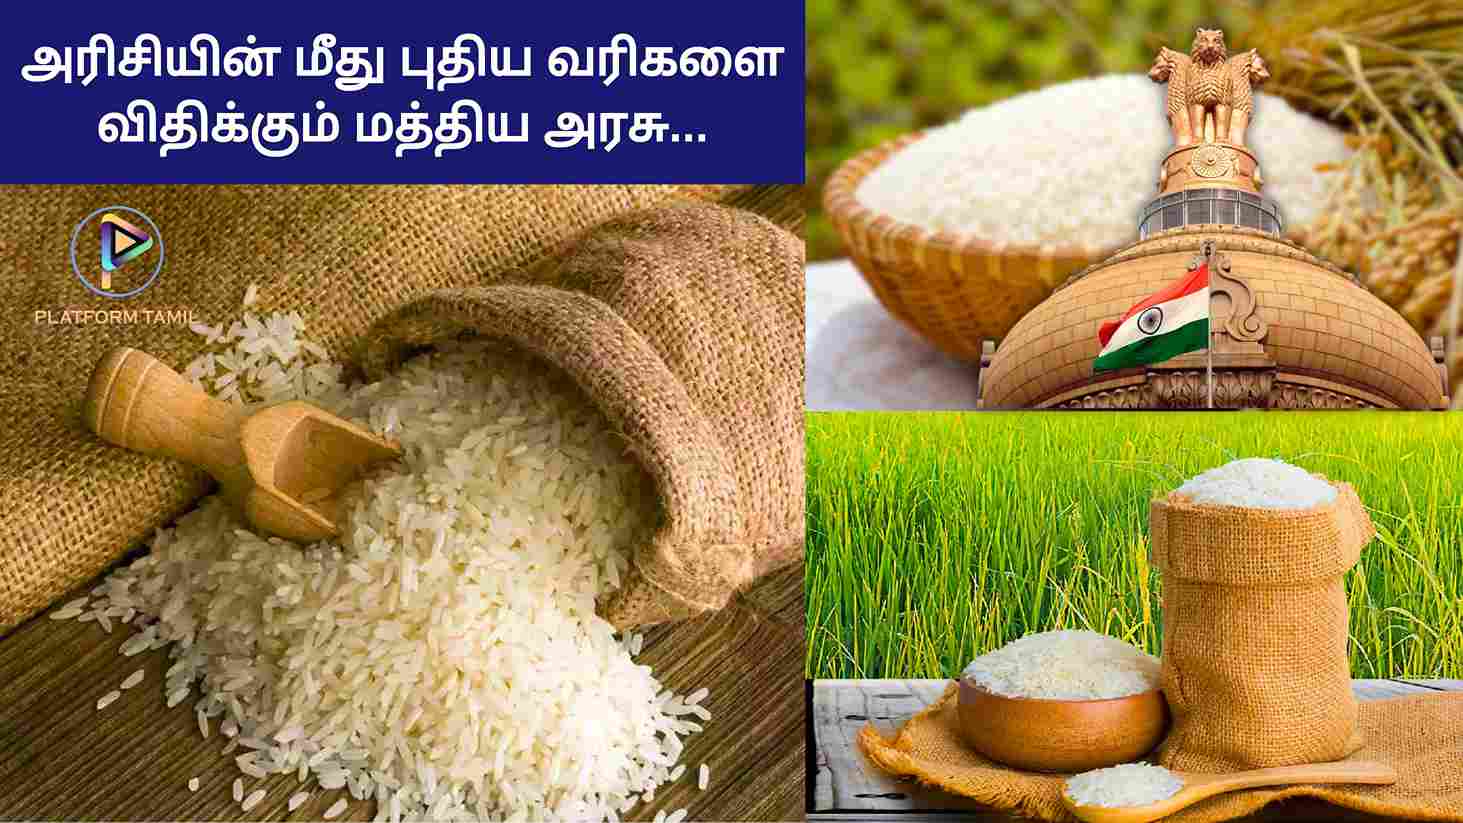 India Imposes 20% Export Duty On Rice - Platform Tamil